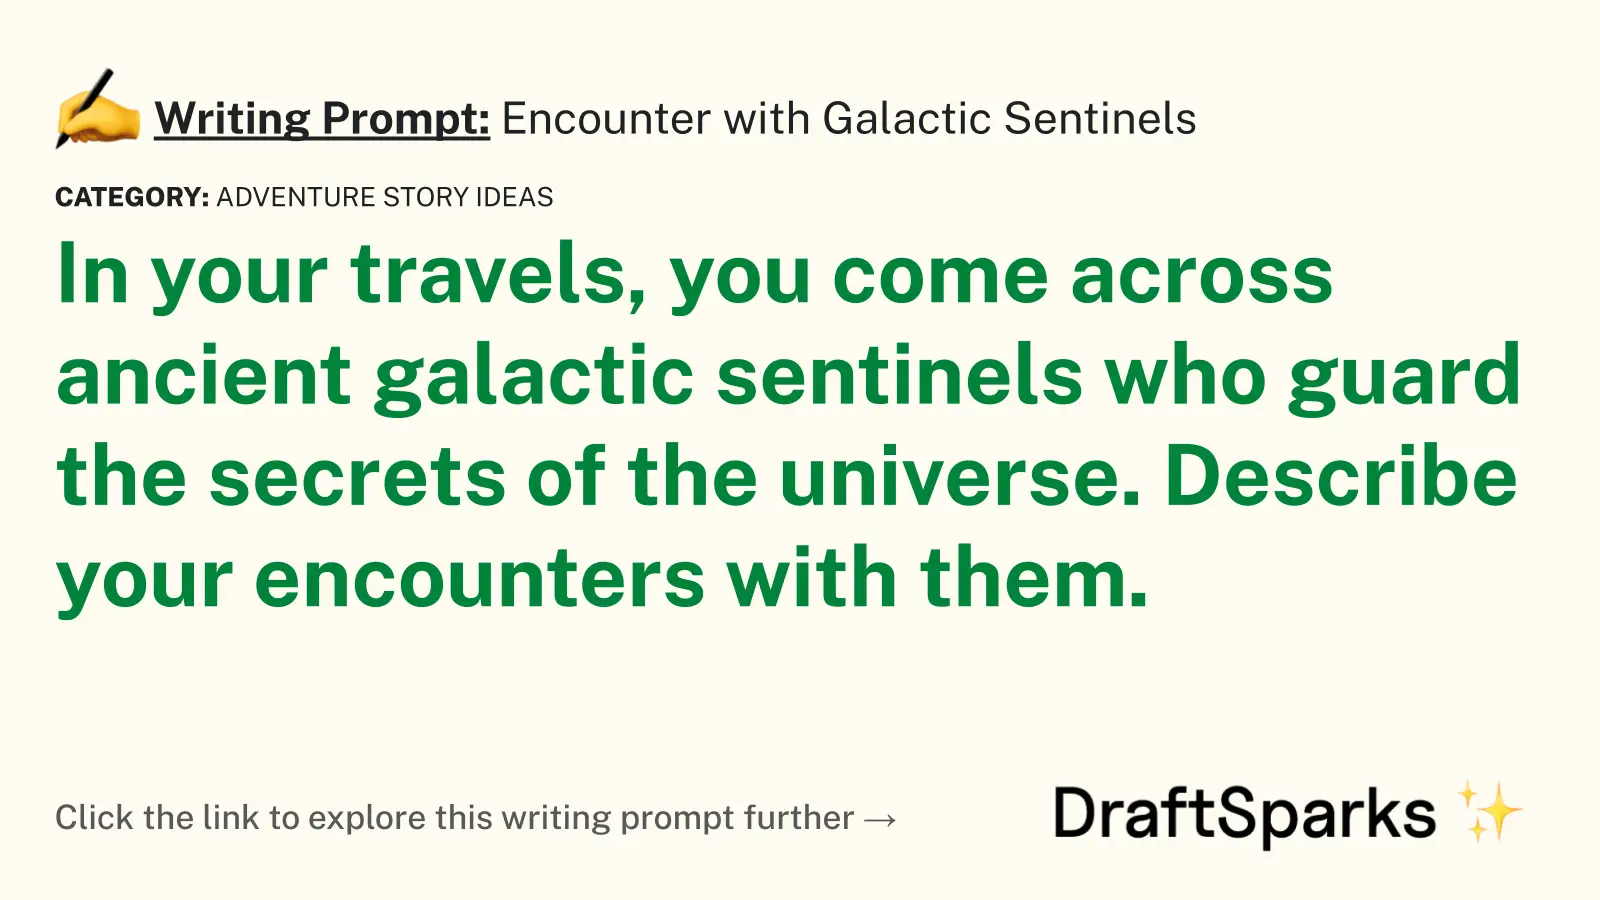 Encounter with Galactic Sentinels